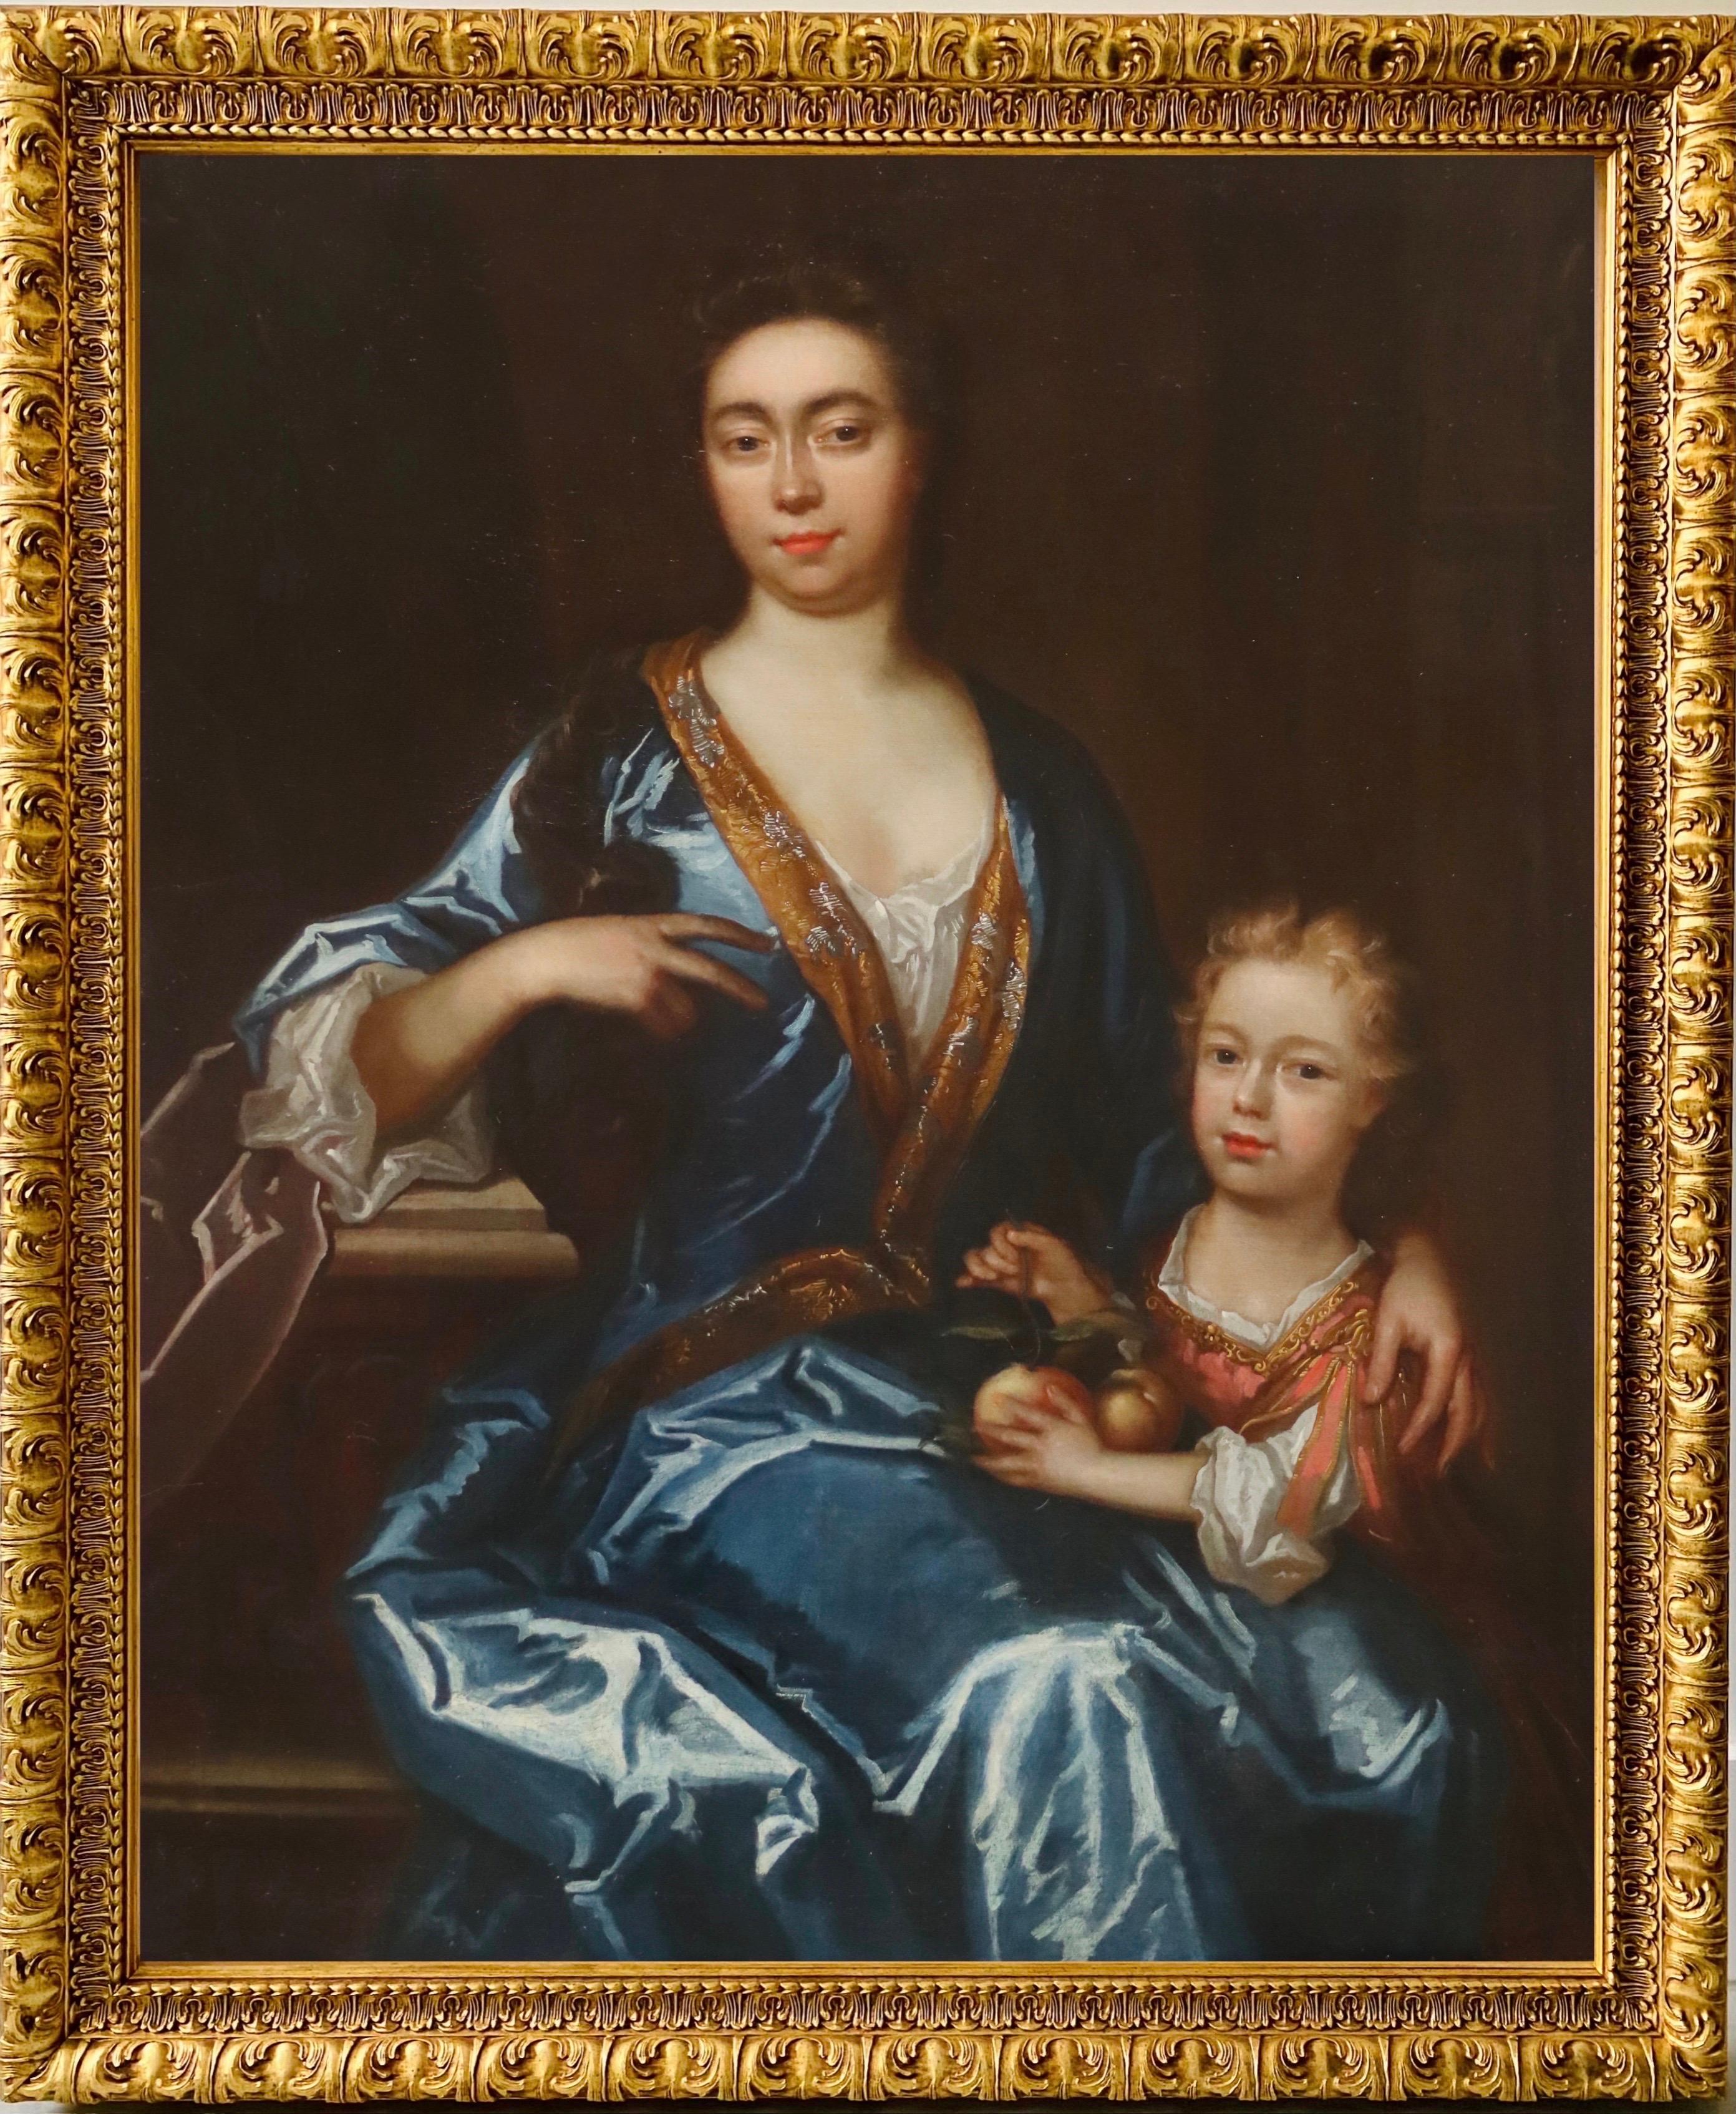 Huge 17th century English portrait painting mother and son - British Family Love